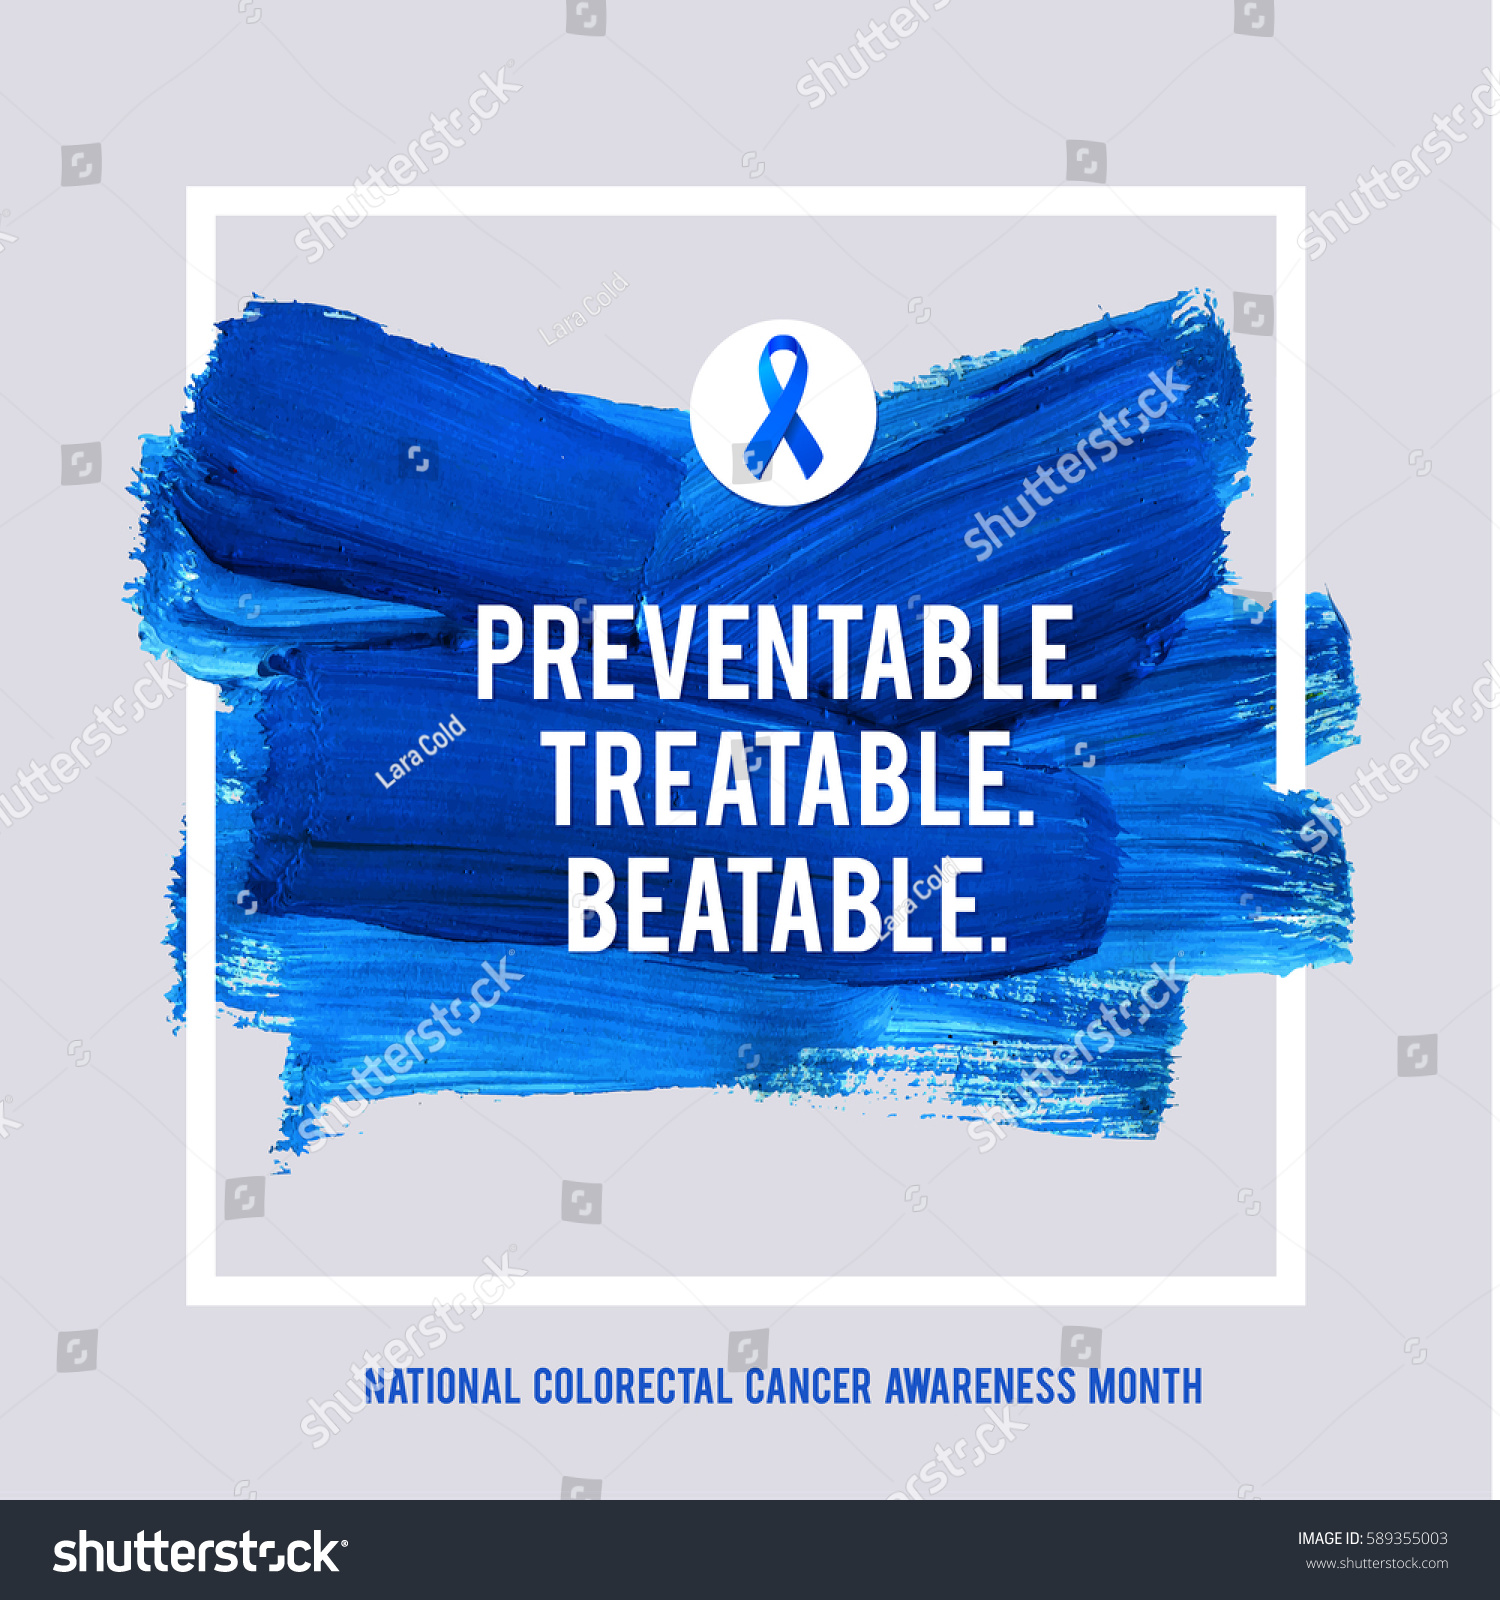 Stock Vector Colorectal Cancer Awareness Creative Grey And Blue Poster Brush Stroke And Silk Ribbon Symbol 589355003 